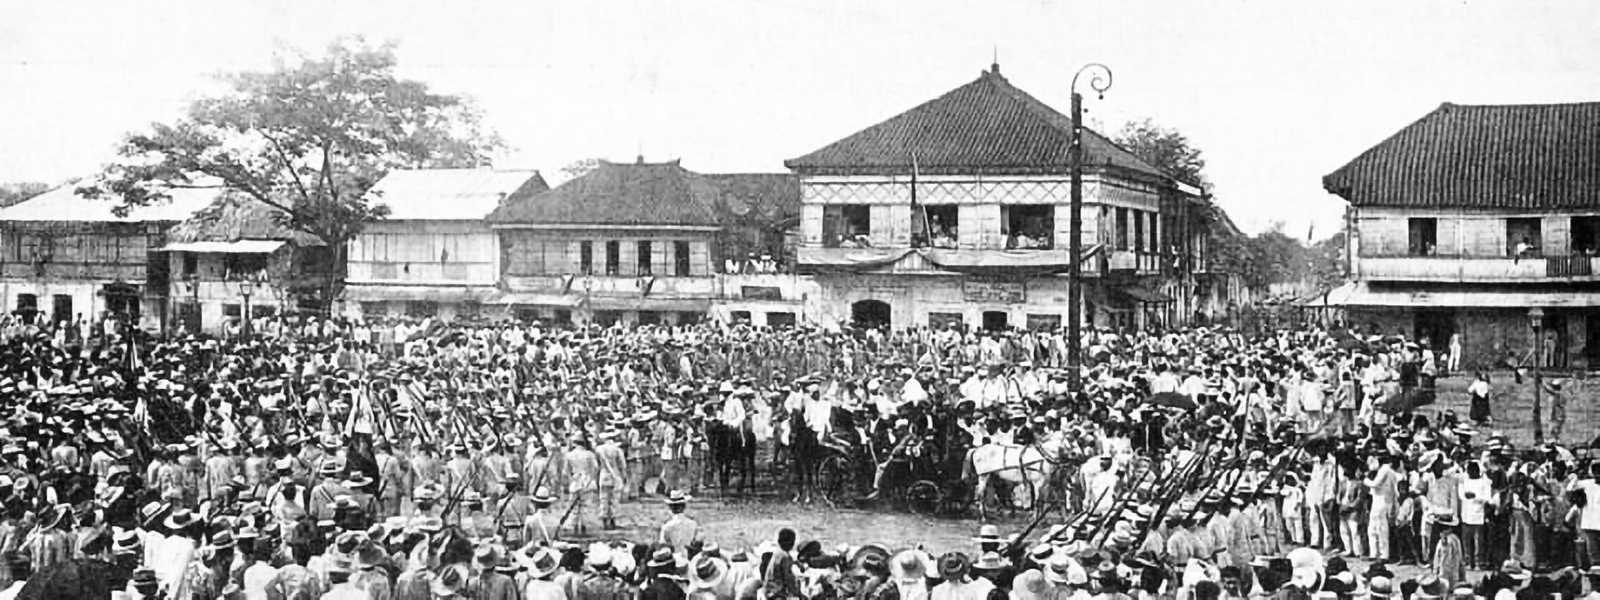 Black and white photo of many people gathered in a town center